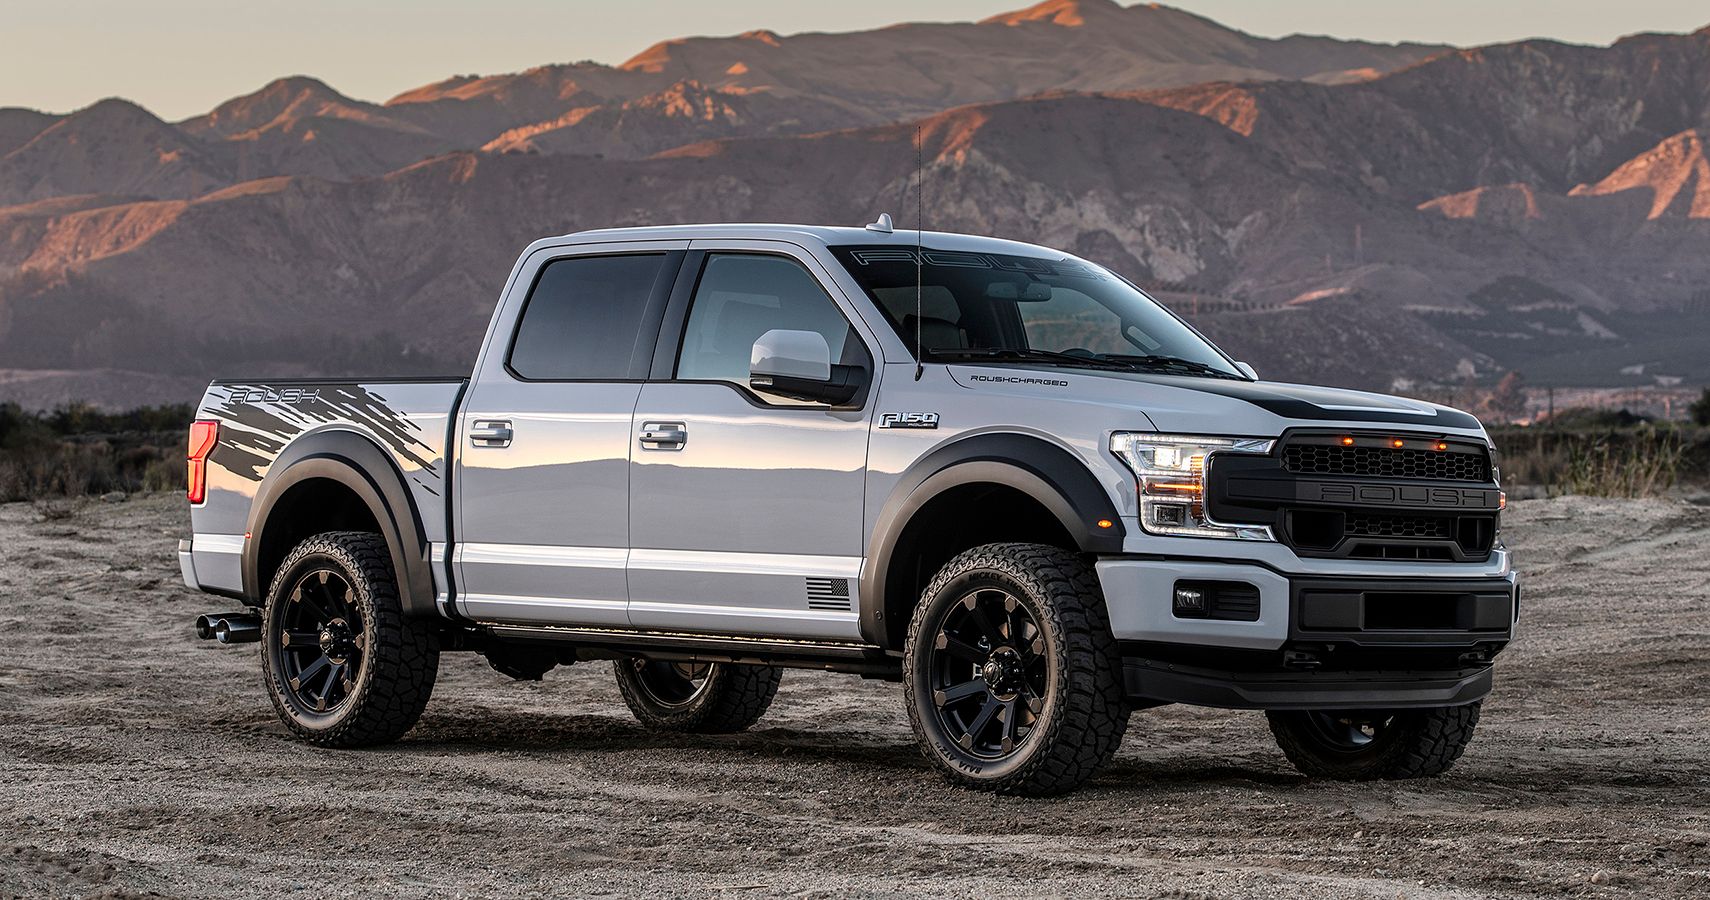 Why Rush, When There’s Roush? 2019 Roush Ford F-150 SC